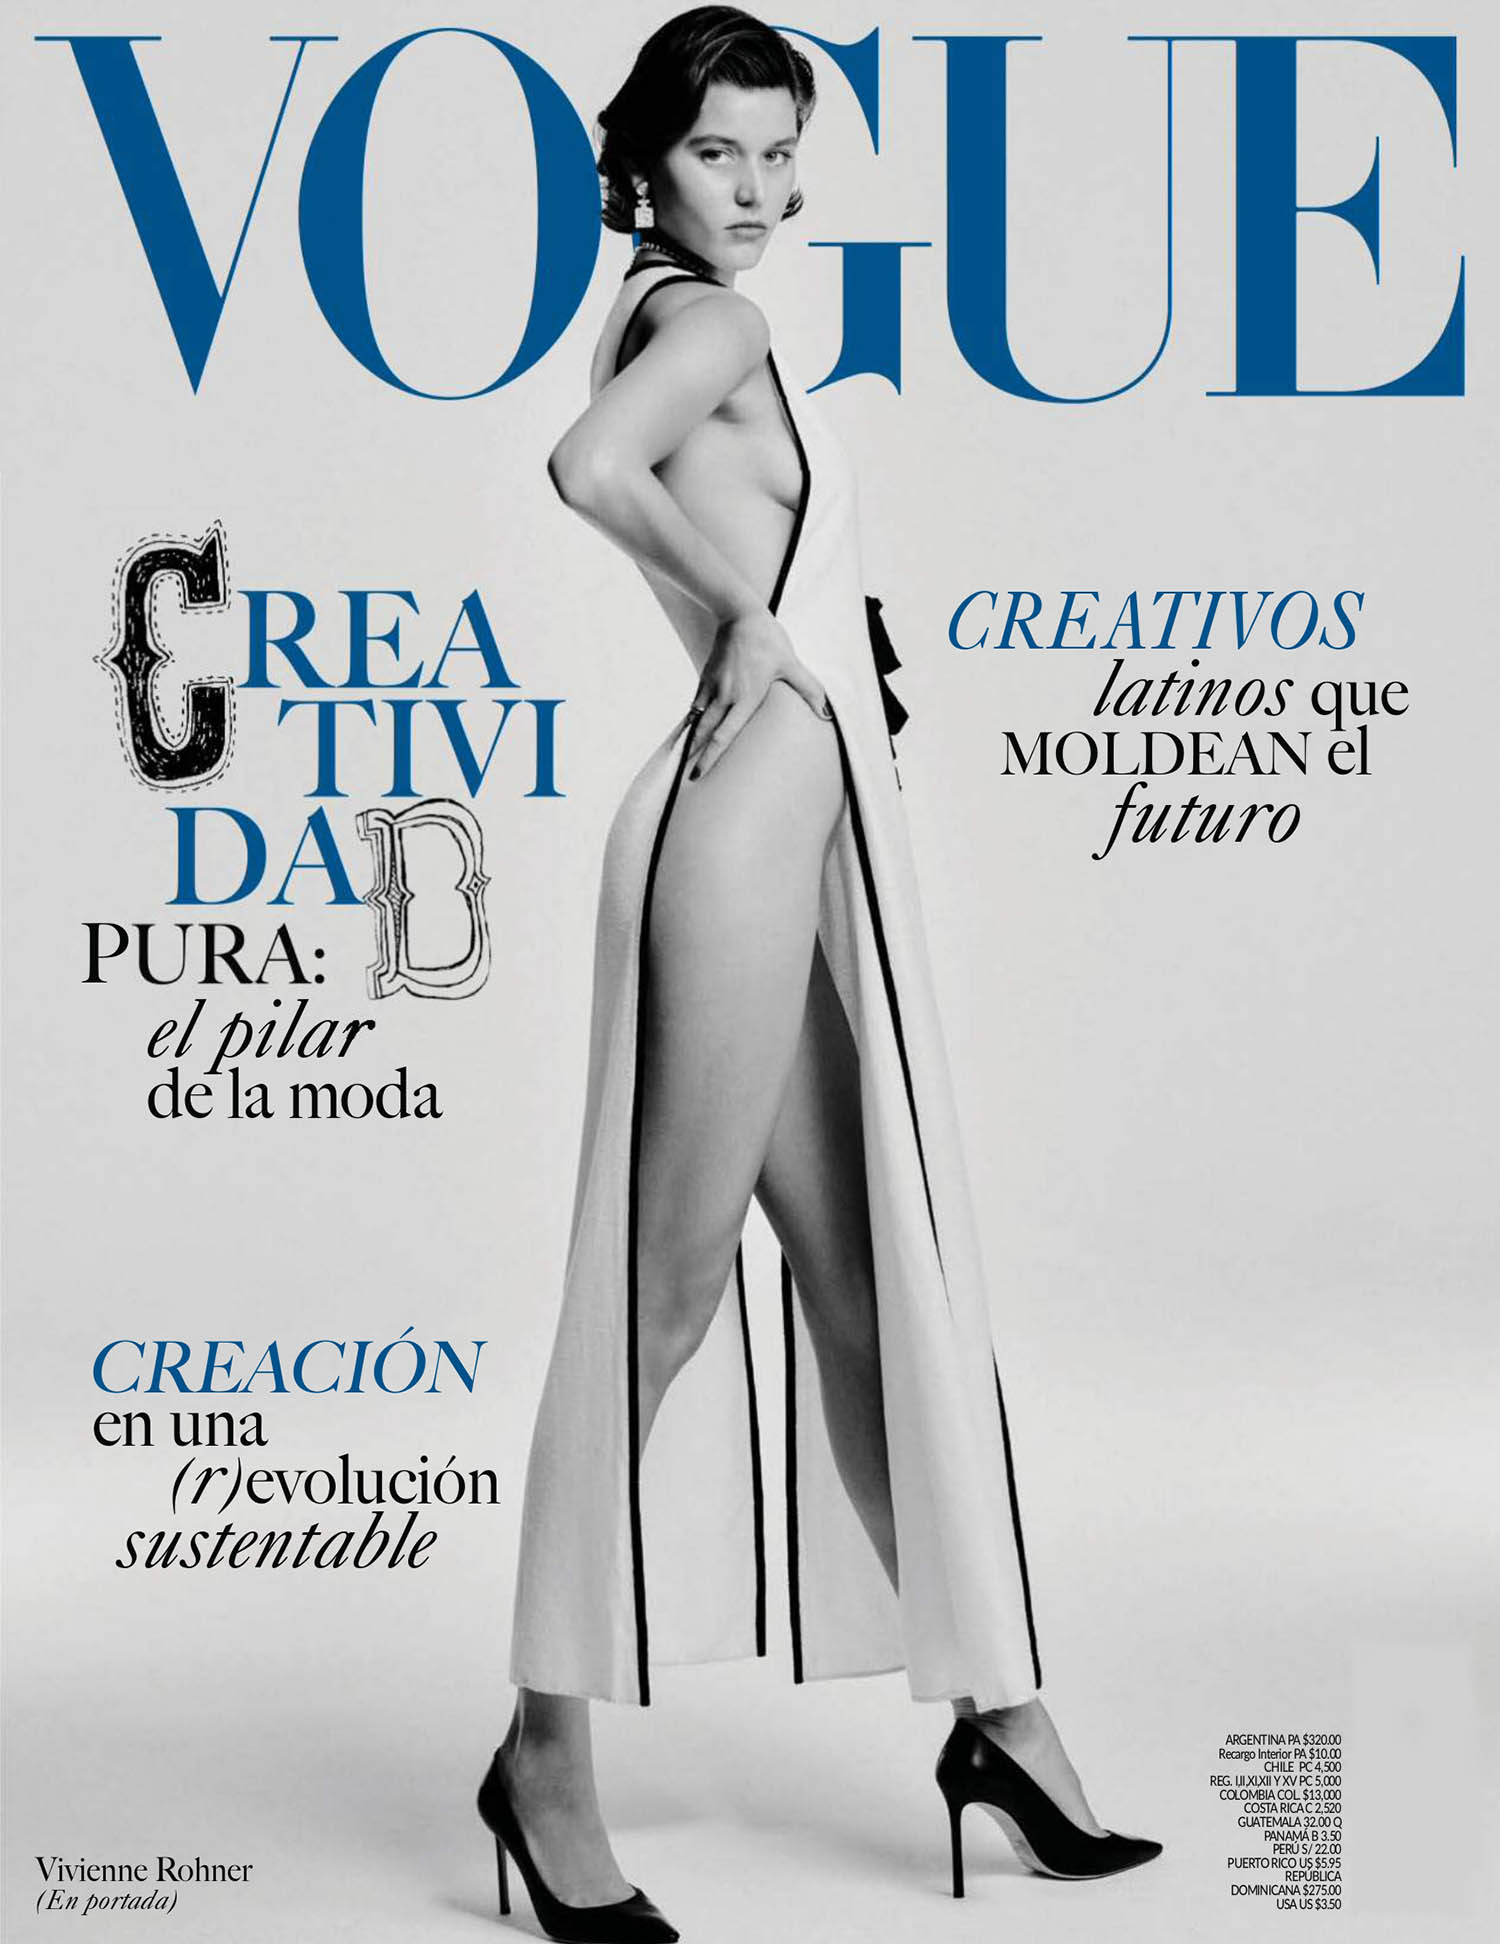 Vivienne Rohner covers Vogue Latin America March 2021 by Chris Colls